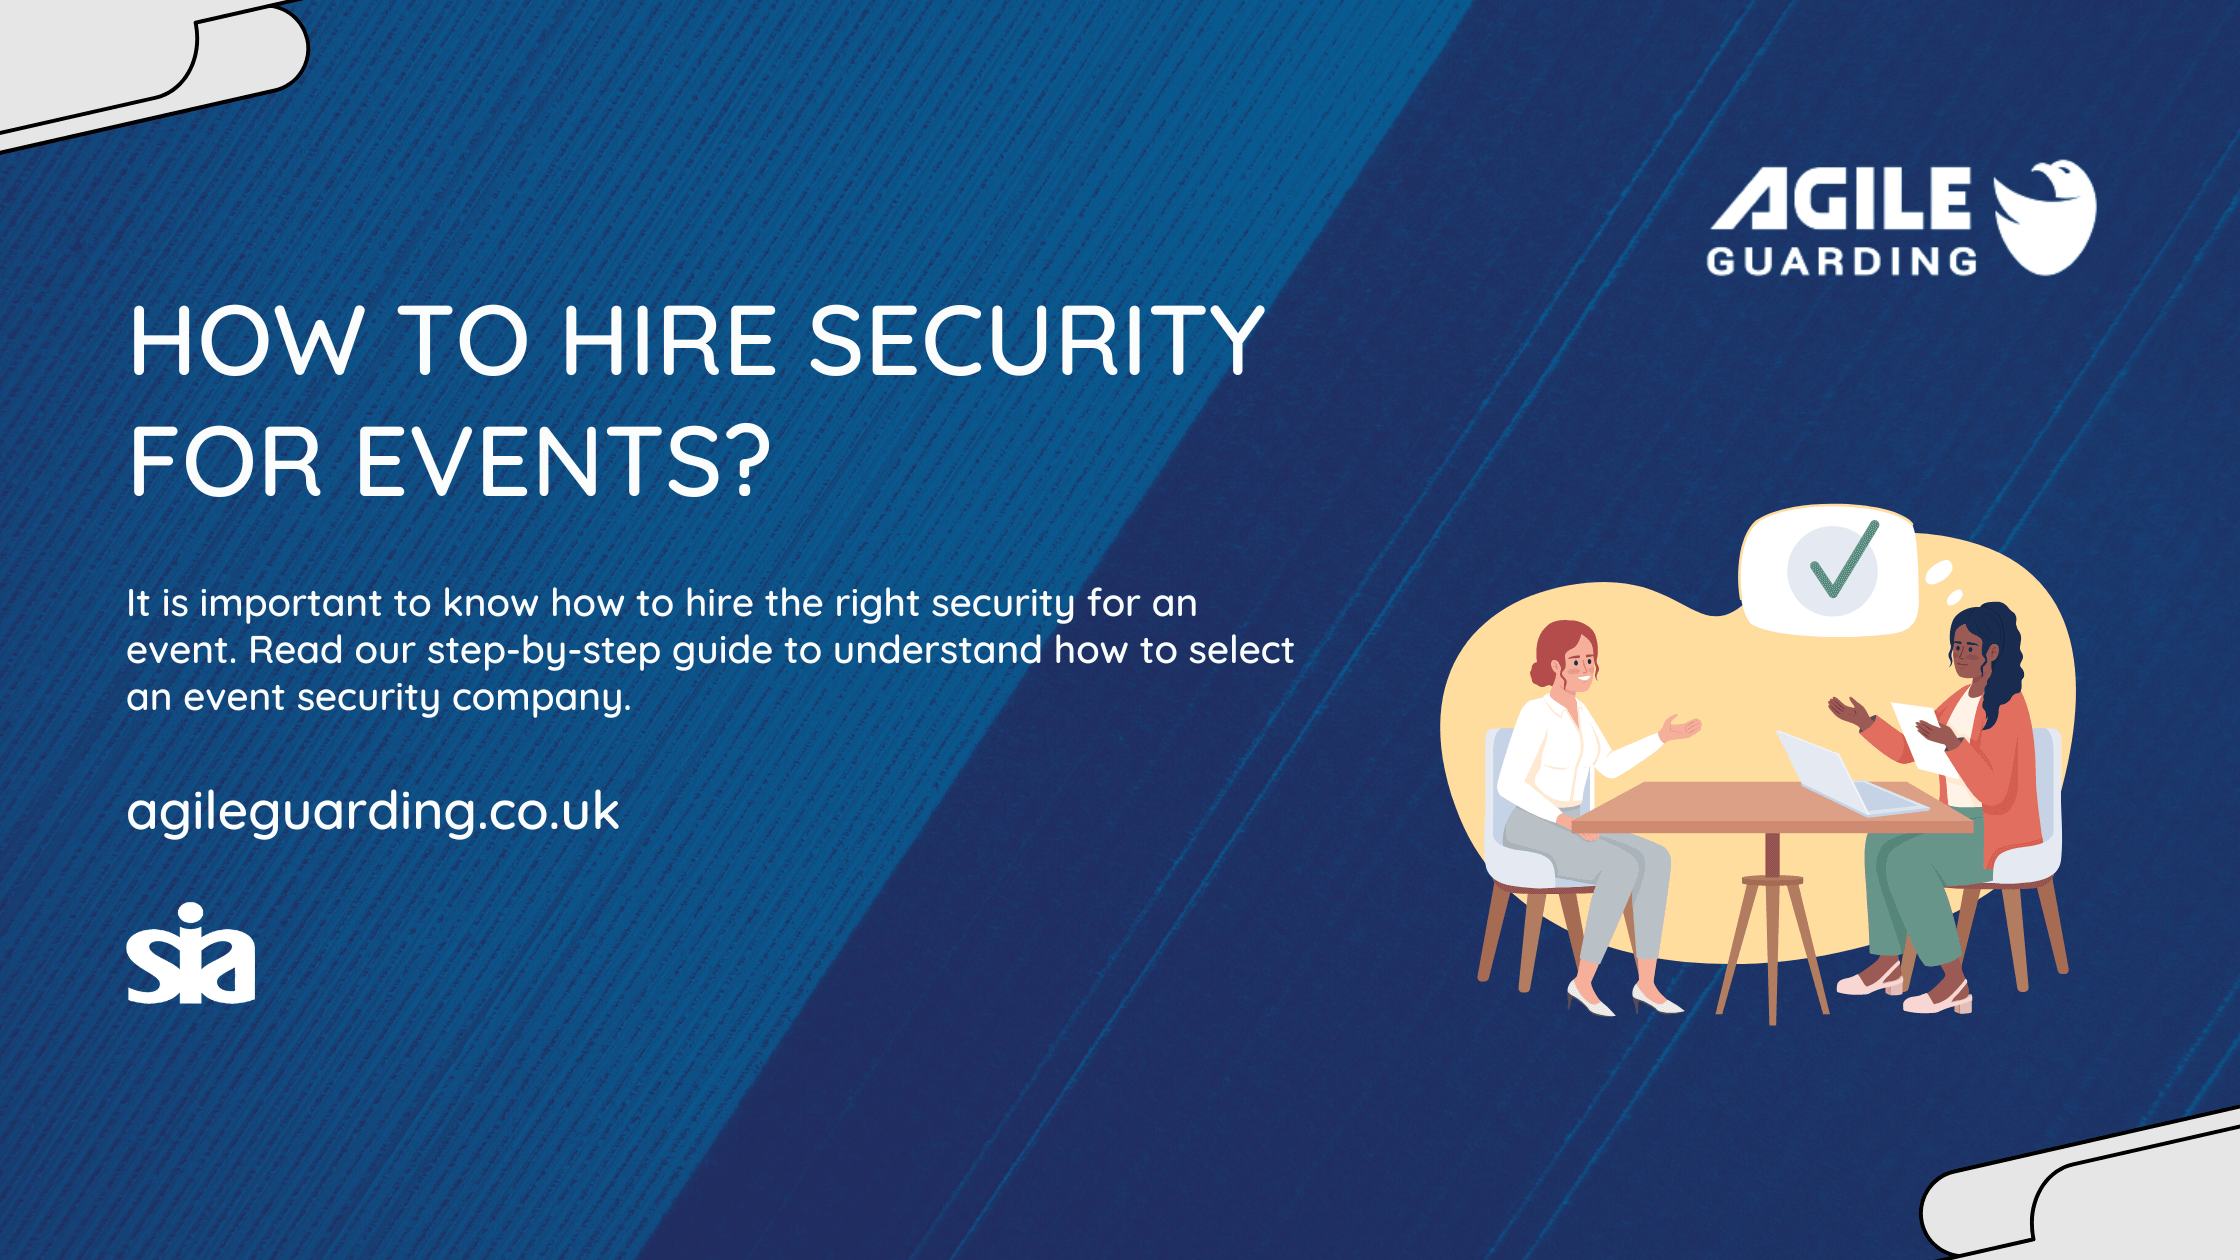 How to hire security for events